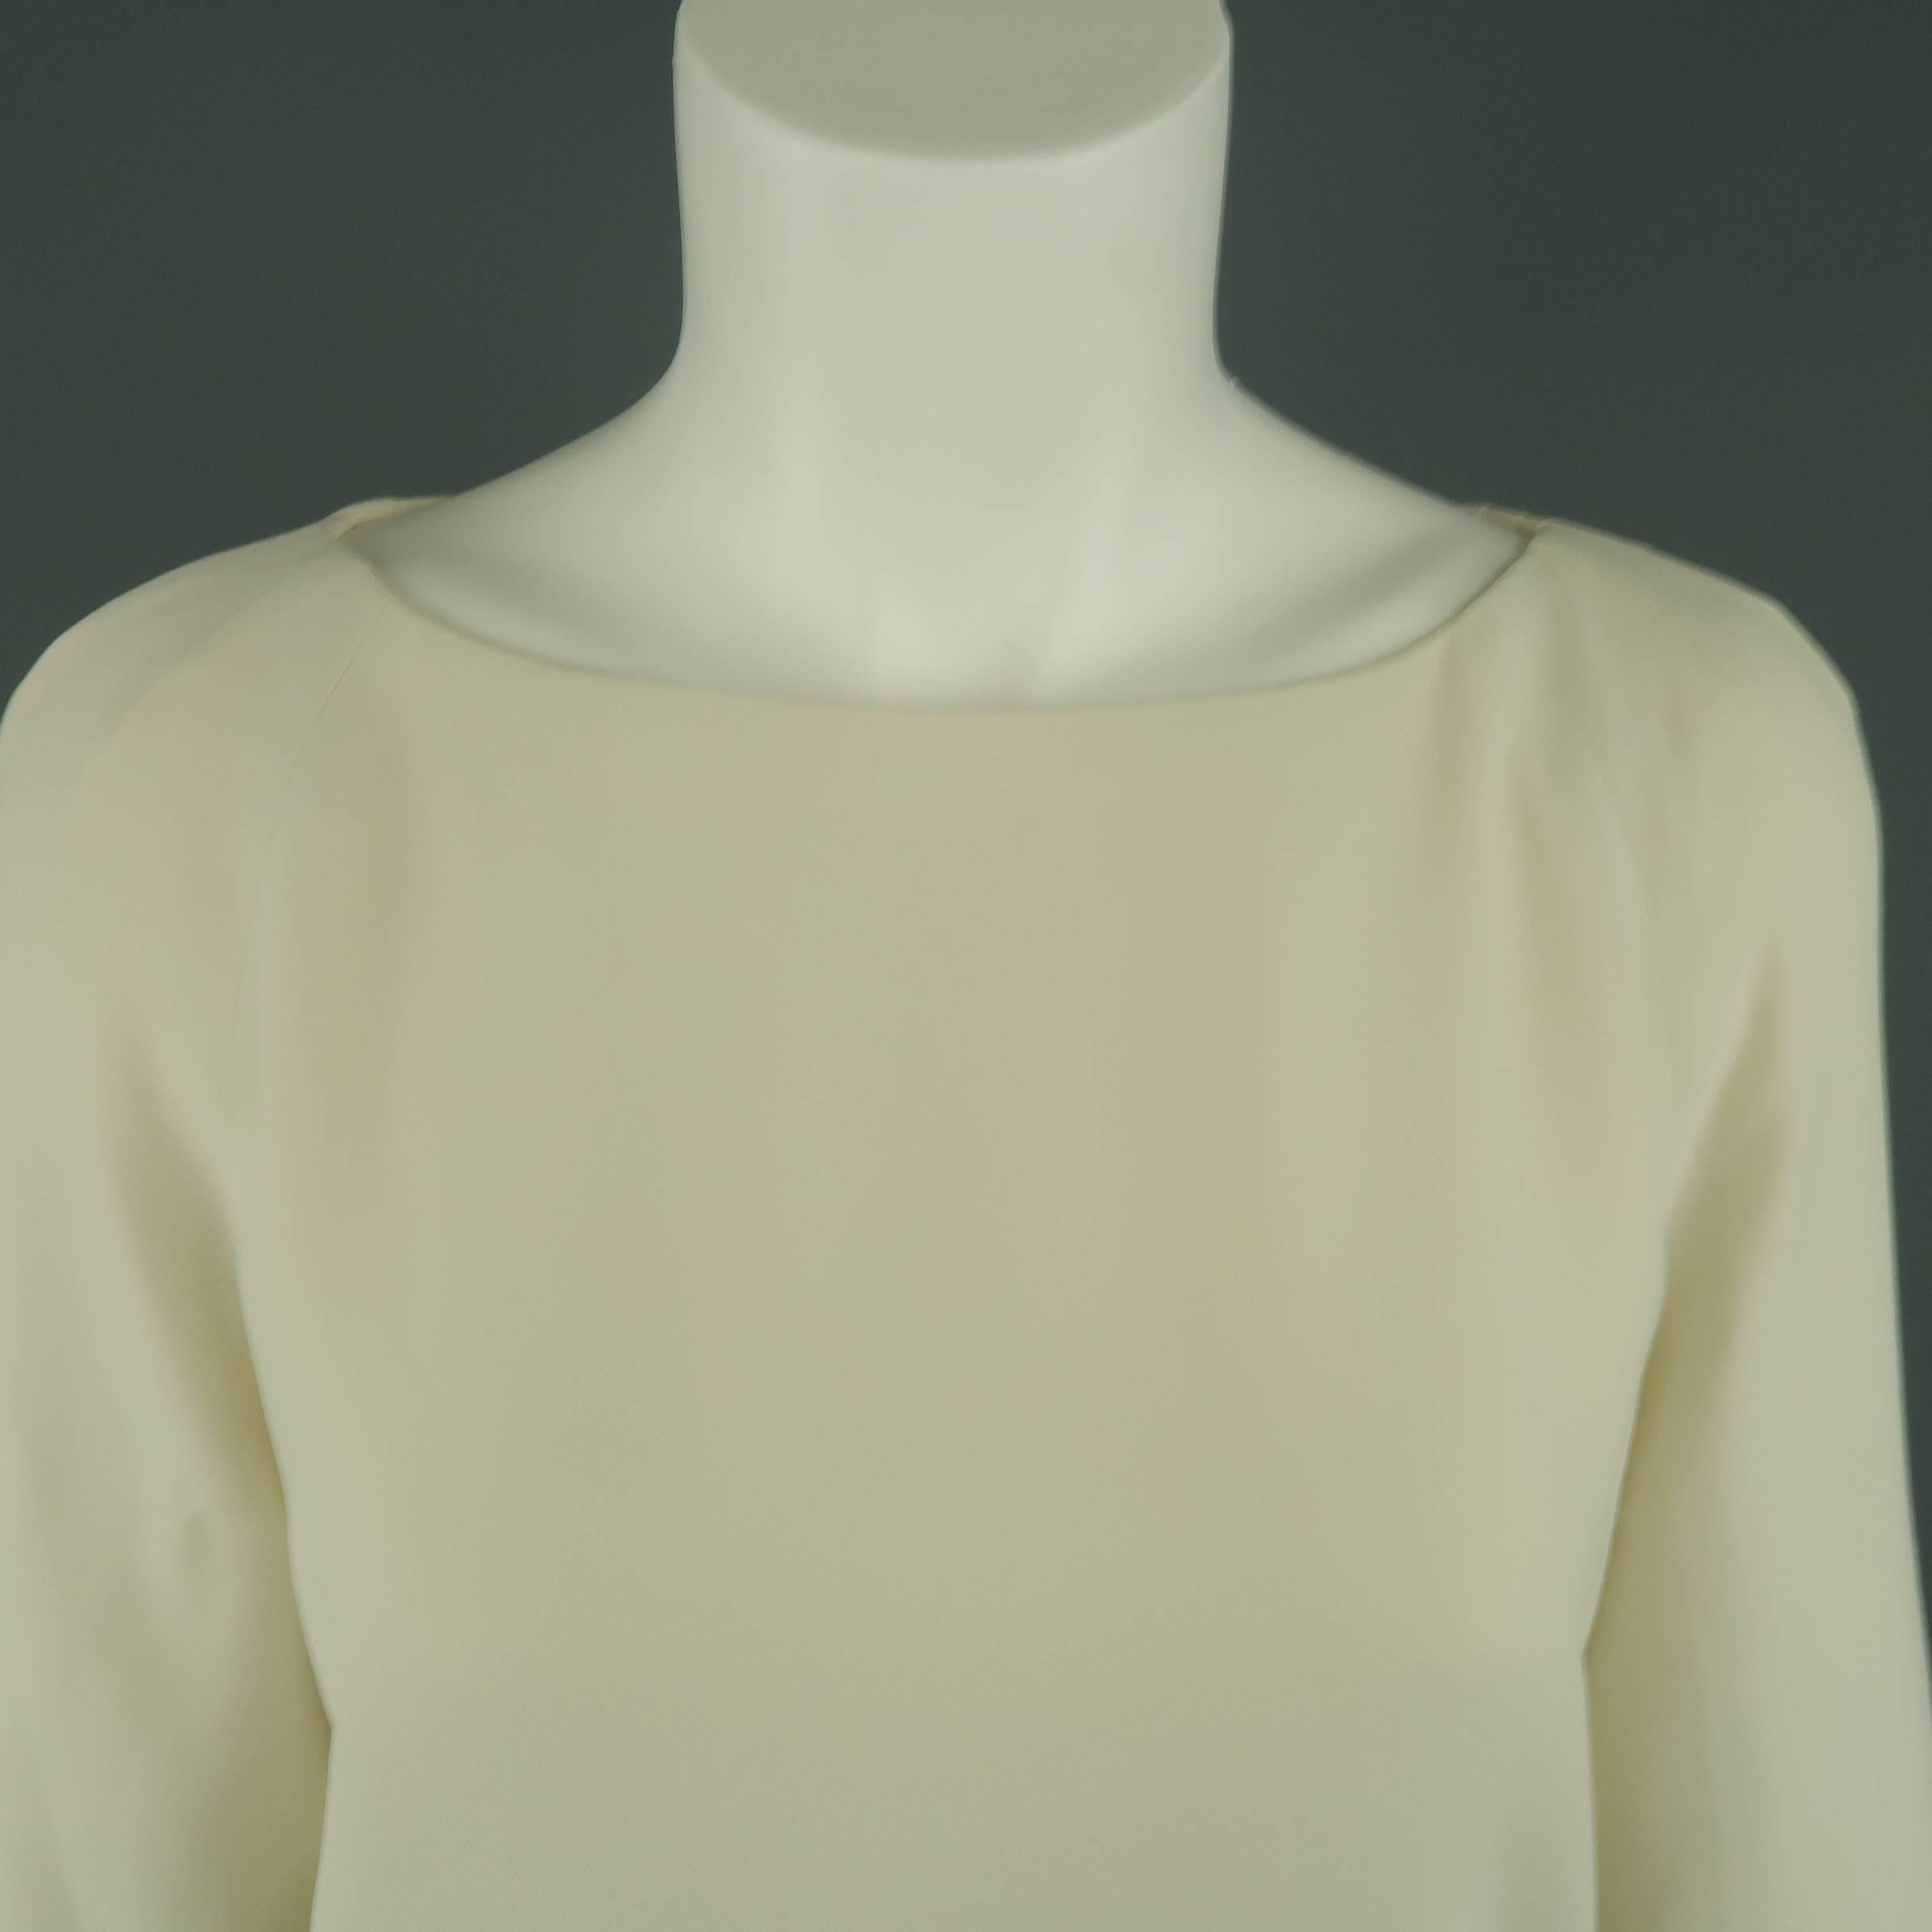 THE ROW blouse comes in creamy beige crepe chiffon with a boat neck, A line silhouette, and bishop sleeves with gold tone button accented cuffs Made in USA.
 
Excellent Pre-Owned Condition.
Marked: 8
 
Measurements:
 
Shoulder: 17 in.
Bust: 40